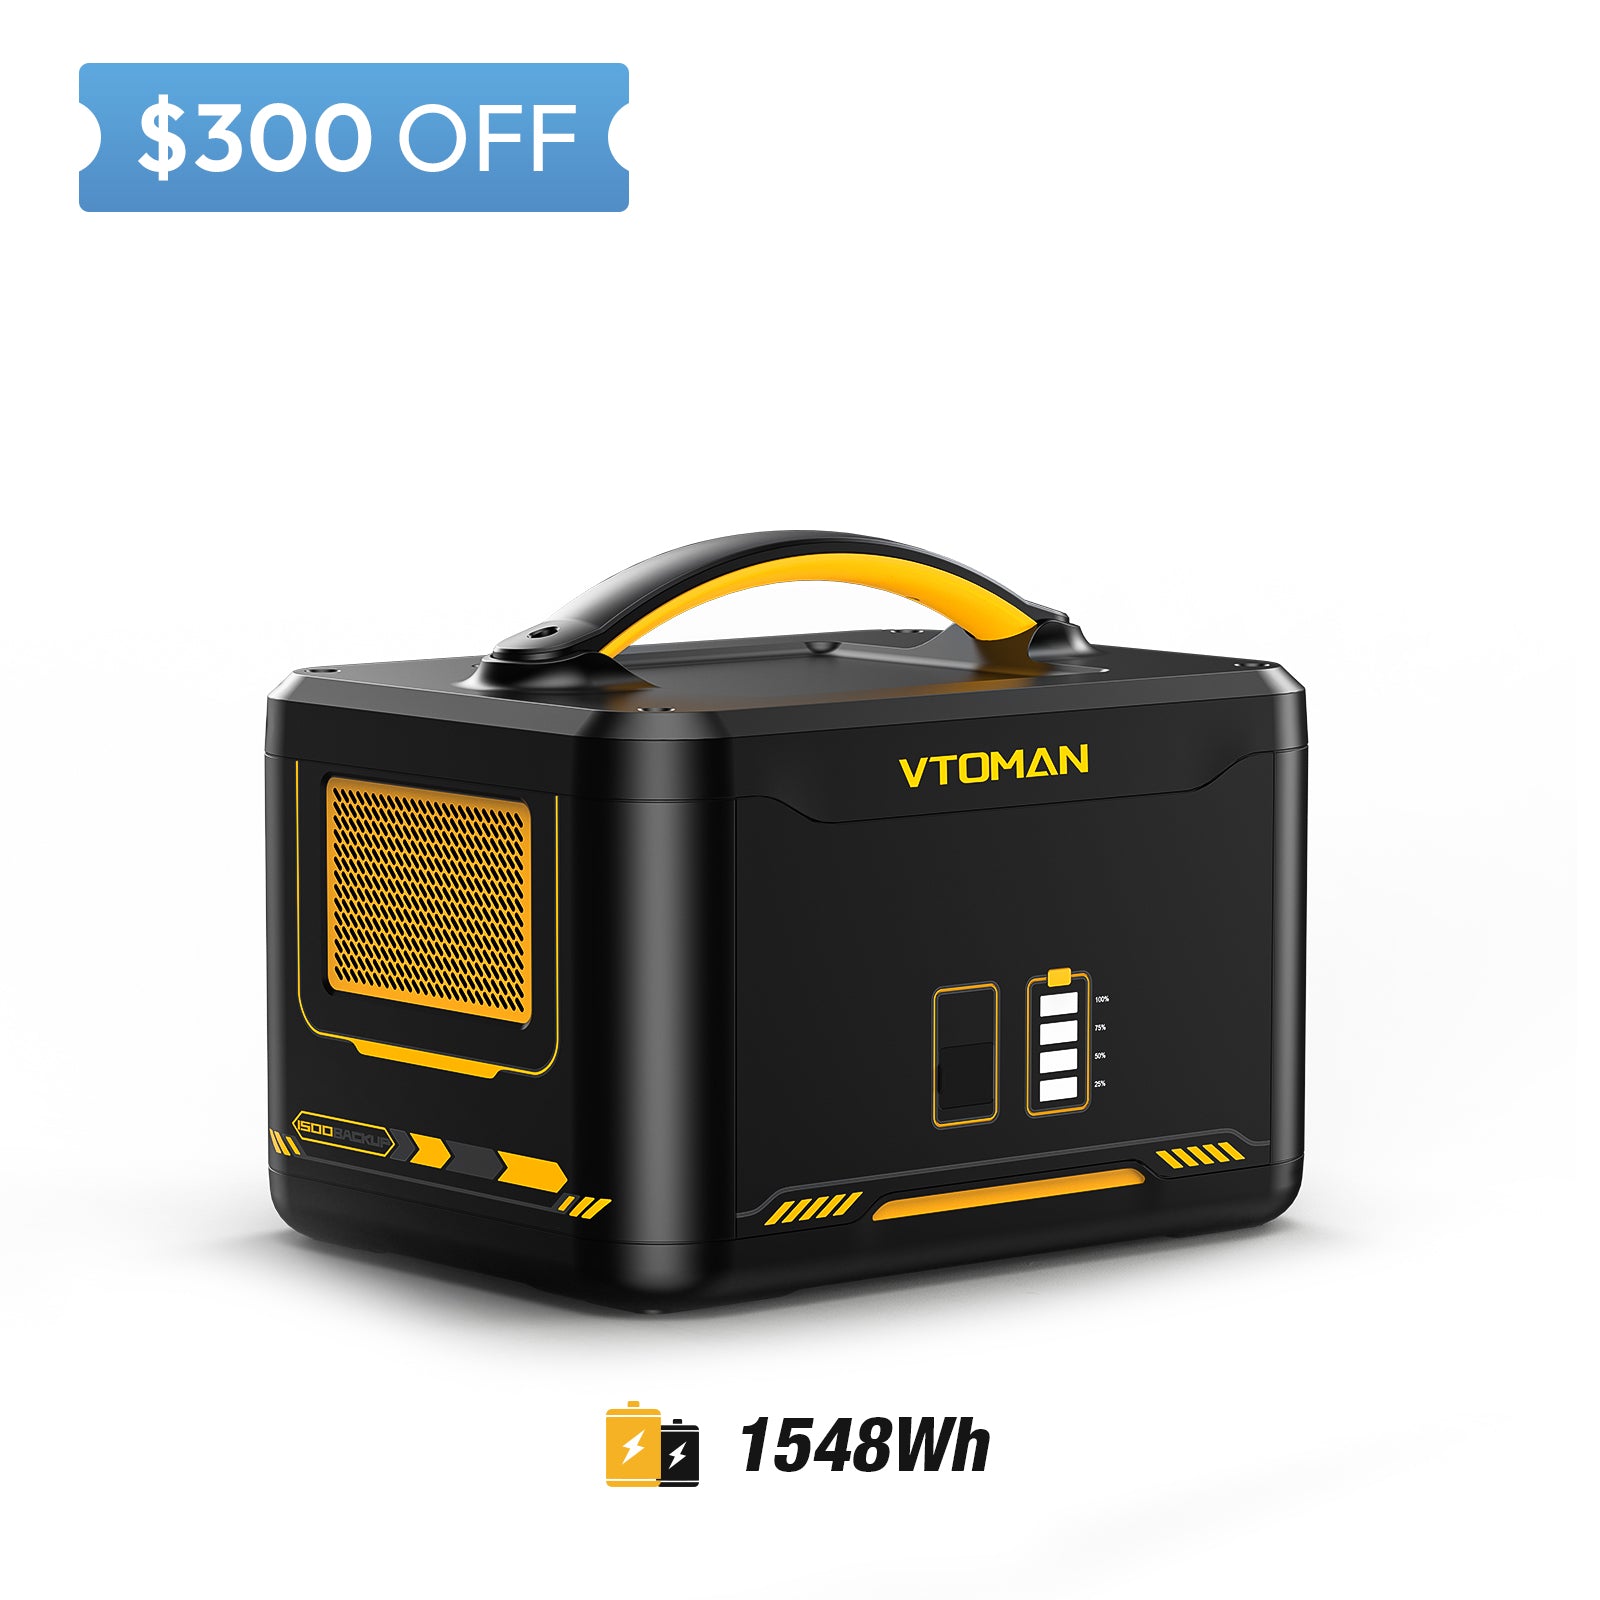 1548wh extra battery save $300 in summer sale